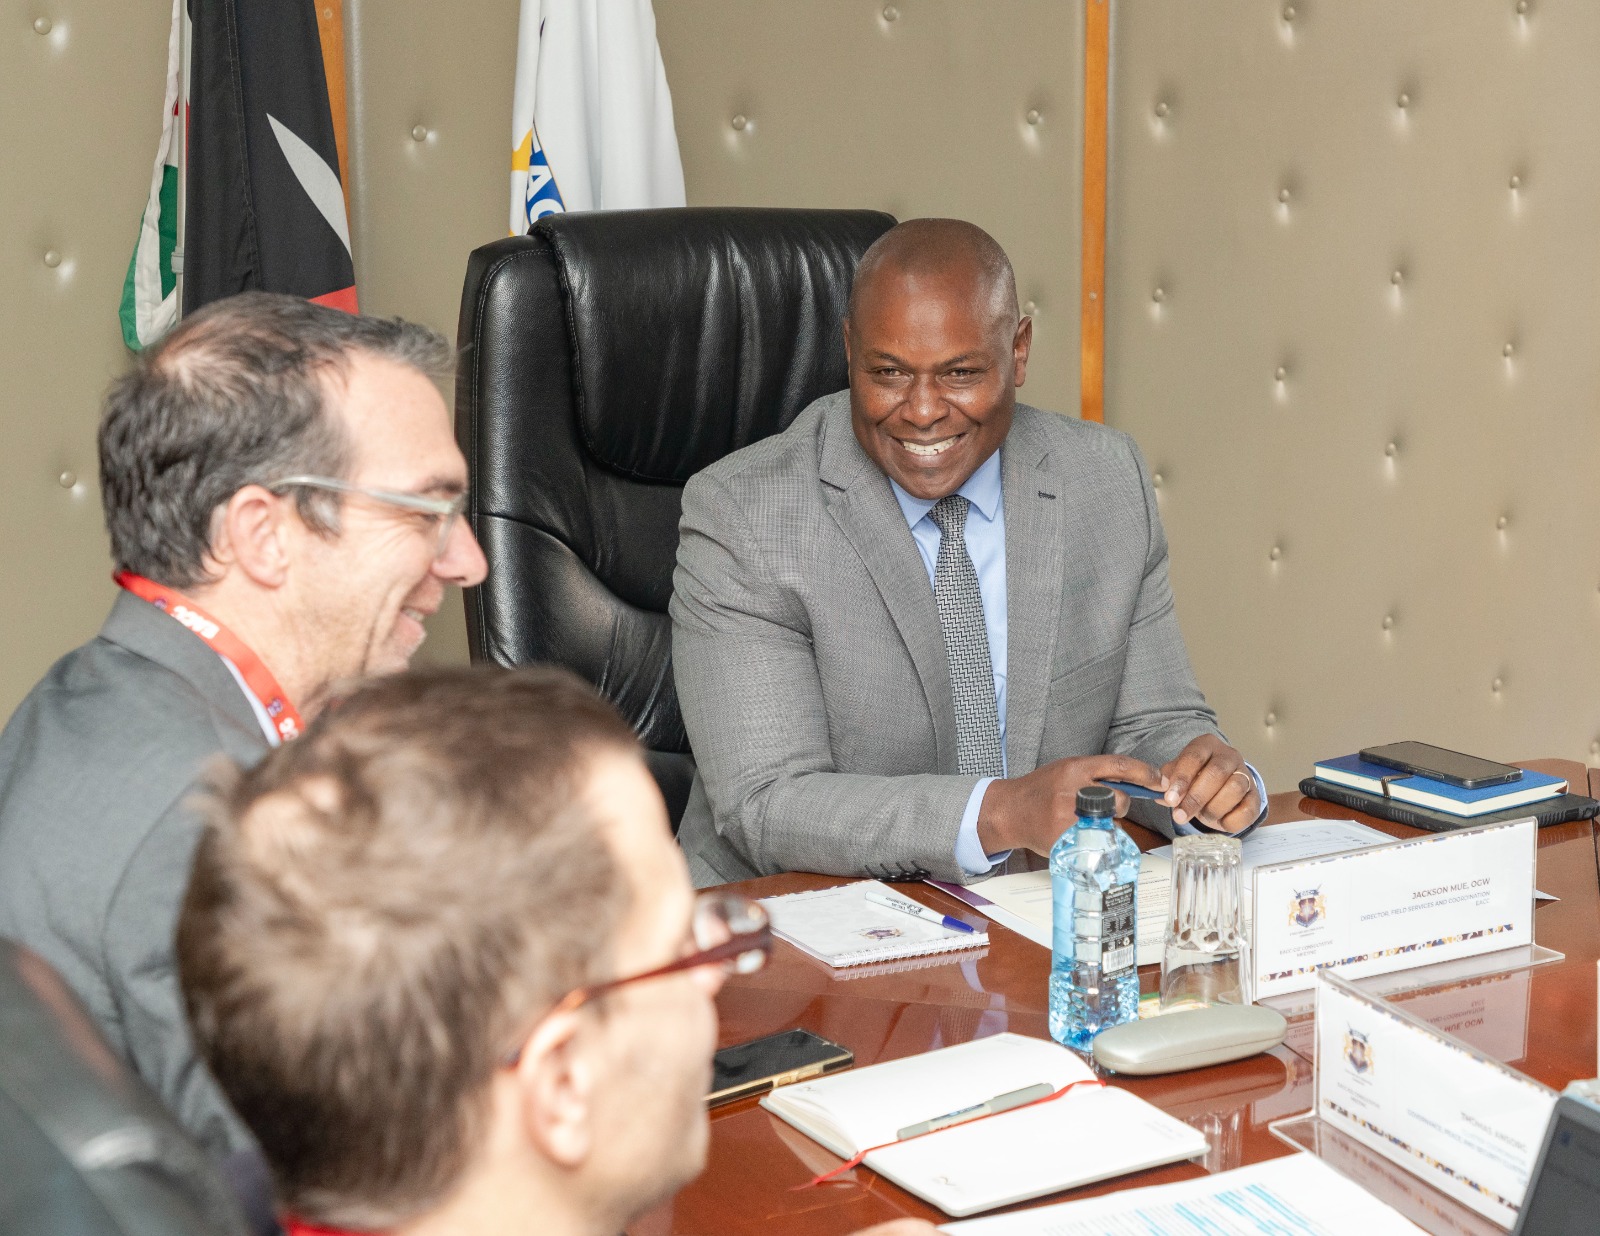 EACC explores further avenues of collaboration with two key stakeholders